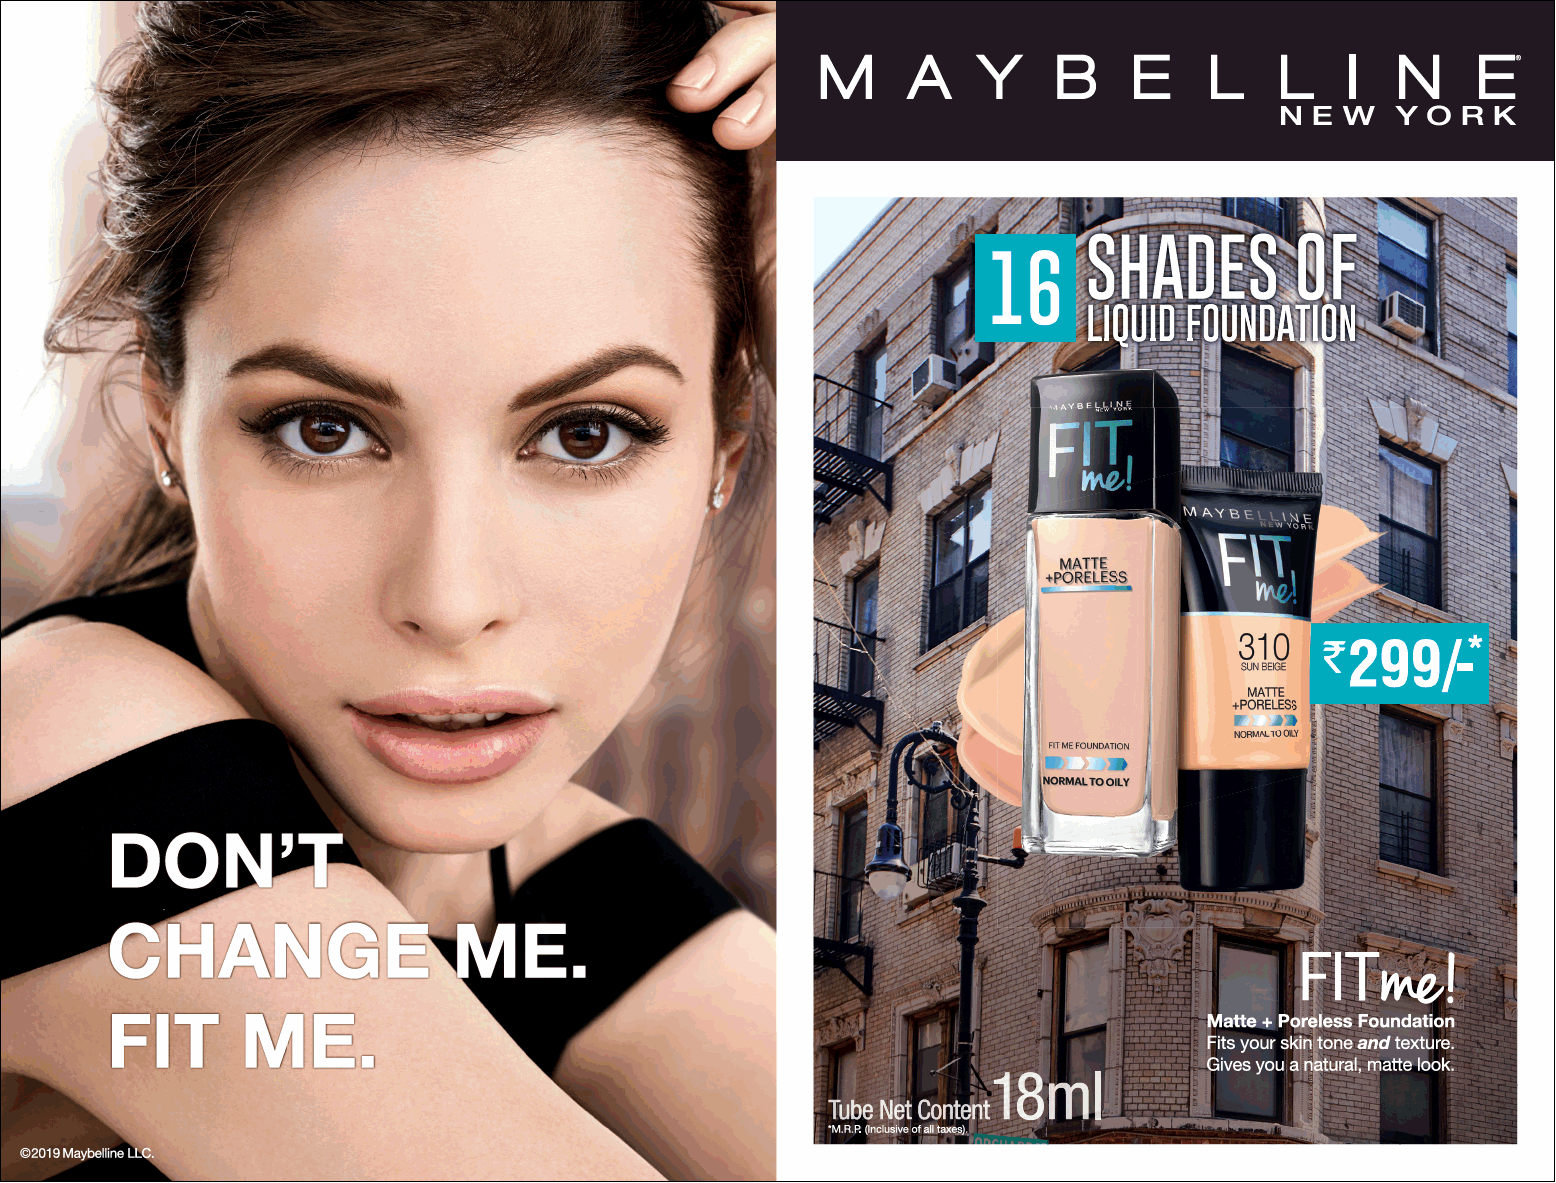 maybelline-new-york-16-shades-of-liquid-foundation-ad-delhi-times-20-03-2019.png